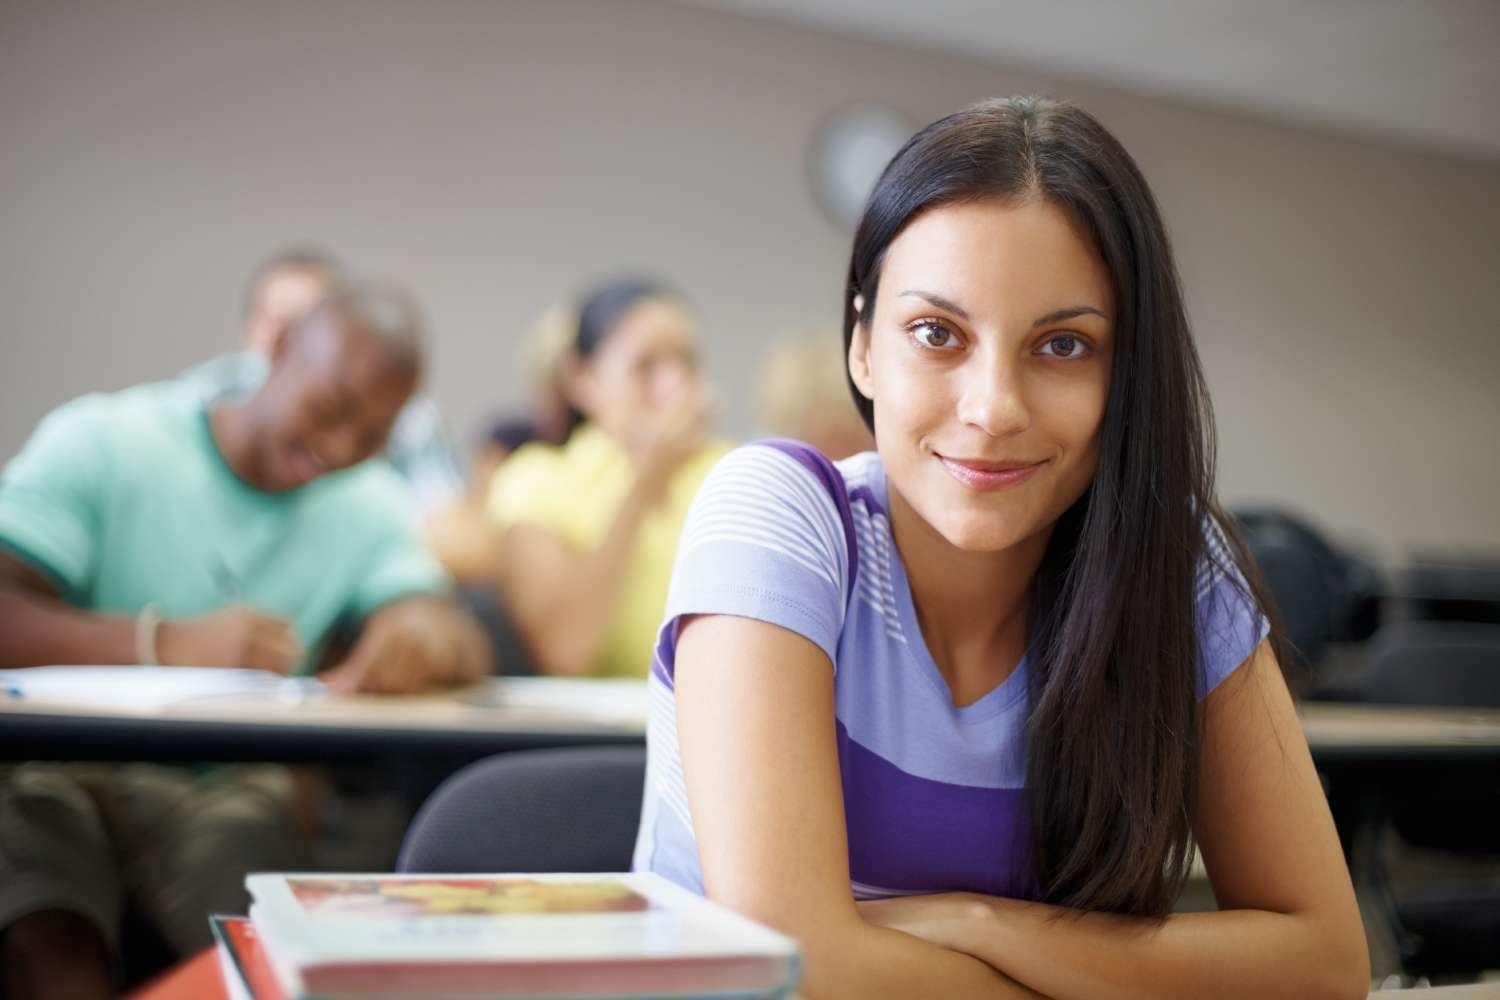 African American college girl sitting in classroom looking at camera.